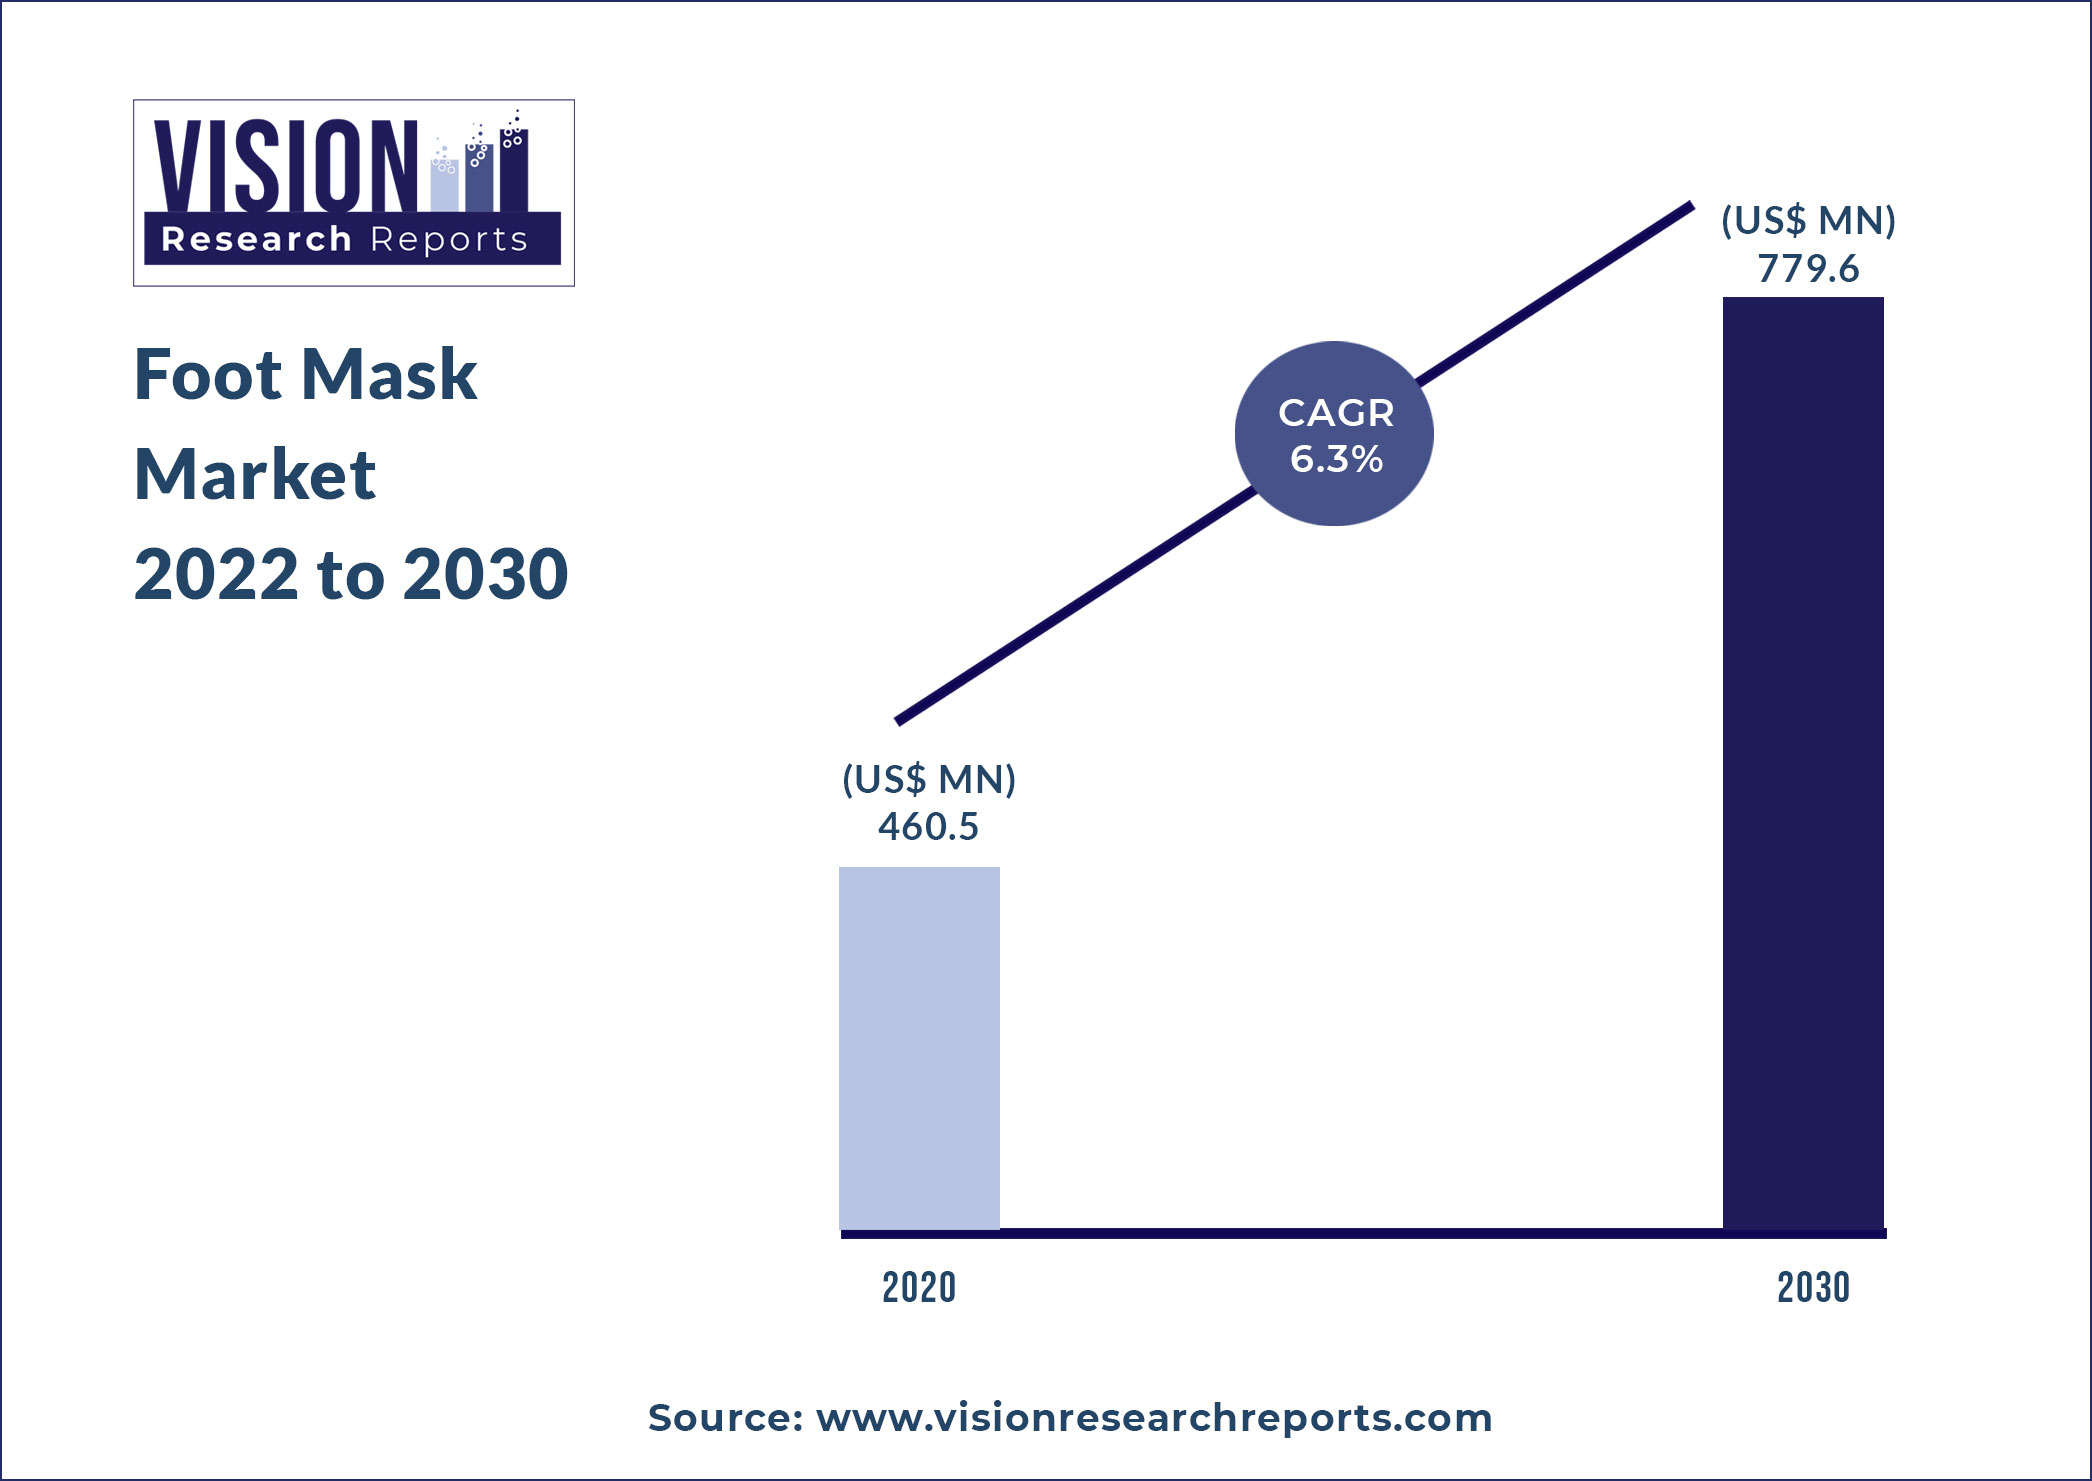 Foot Mask Market Size 2022 to 2030